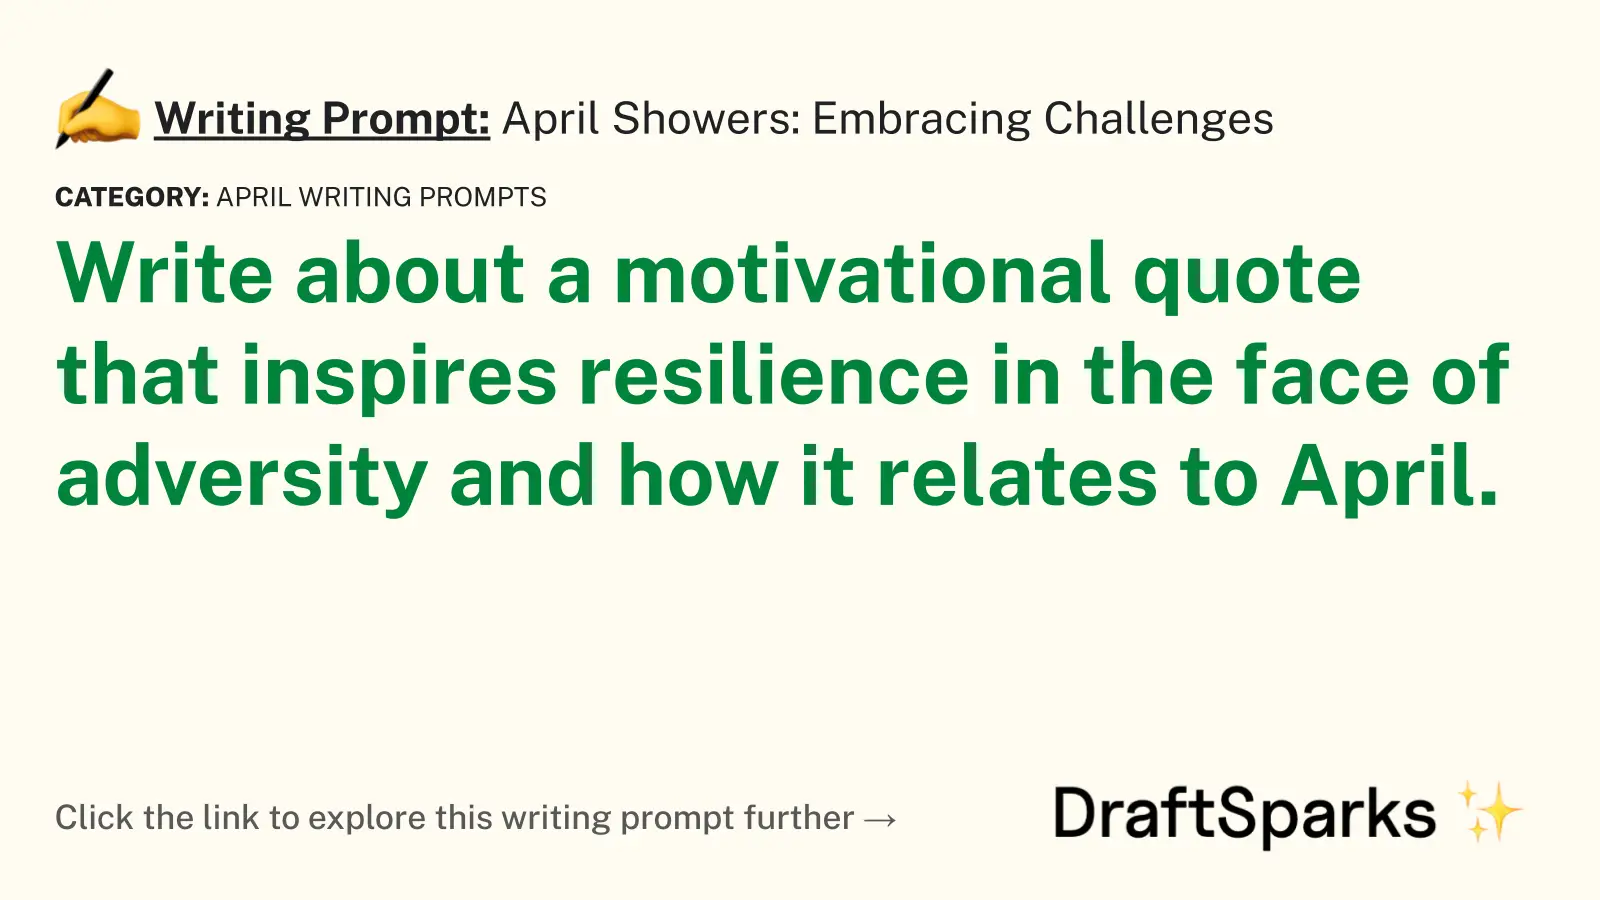 April Showers: Embracing Challenges